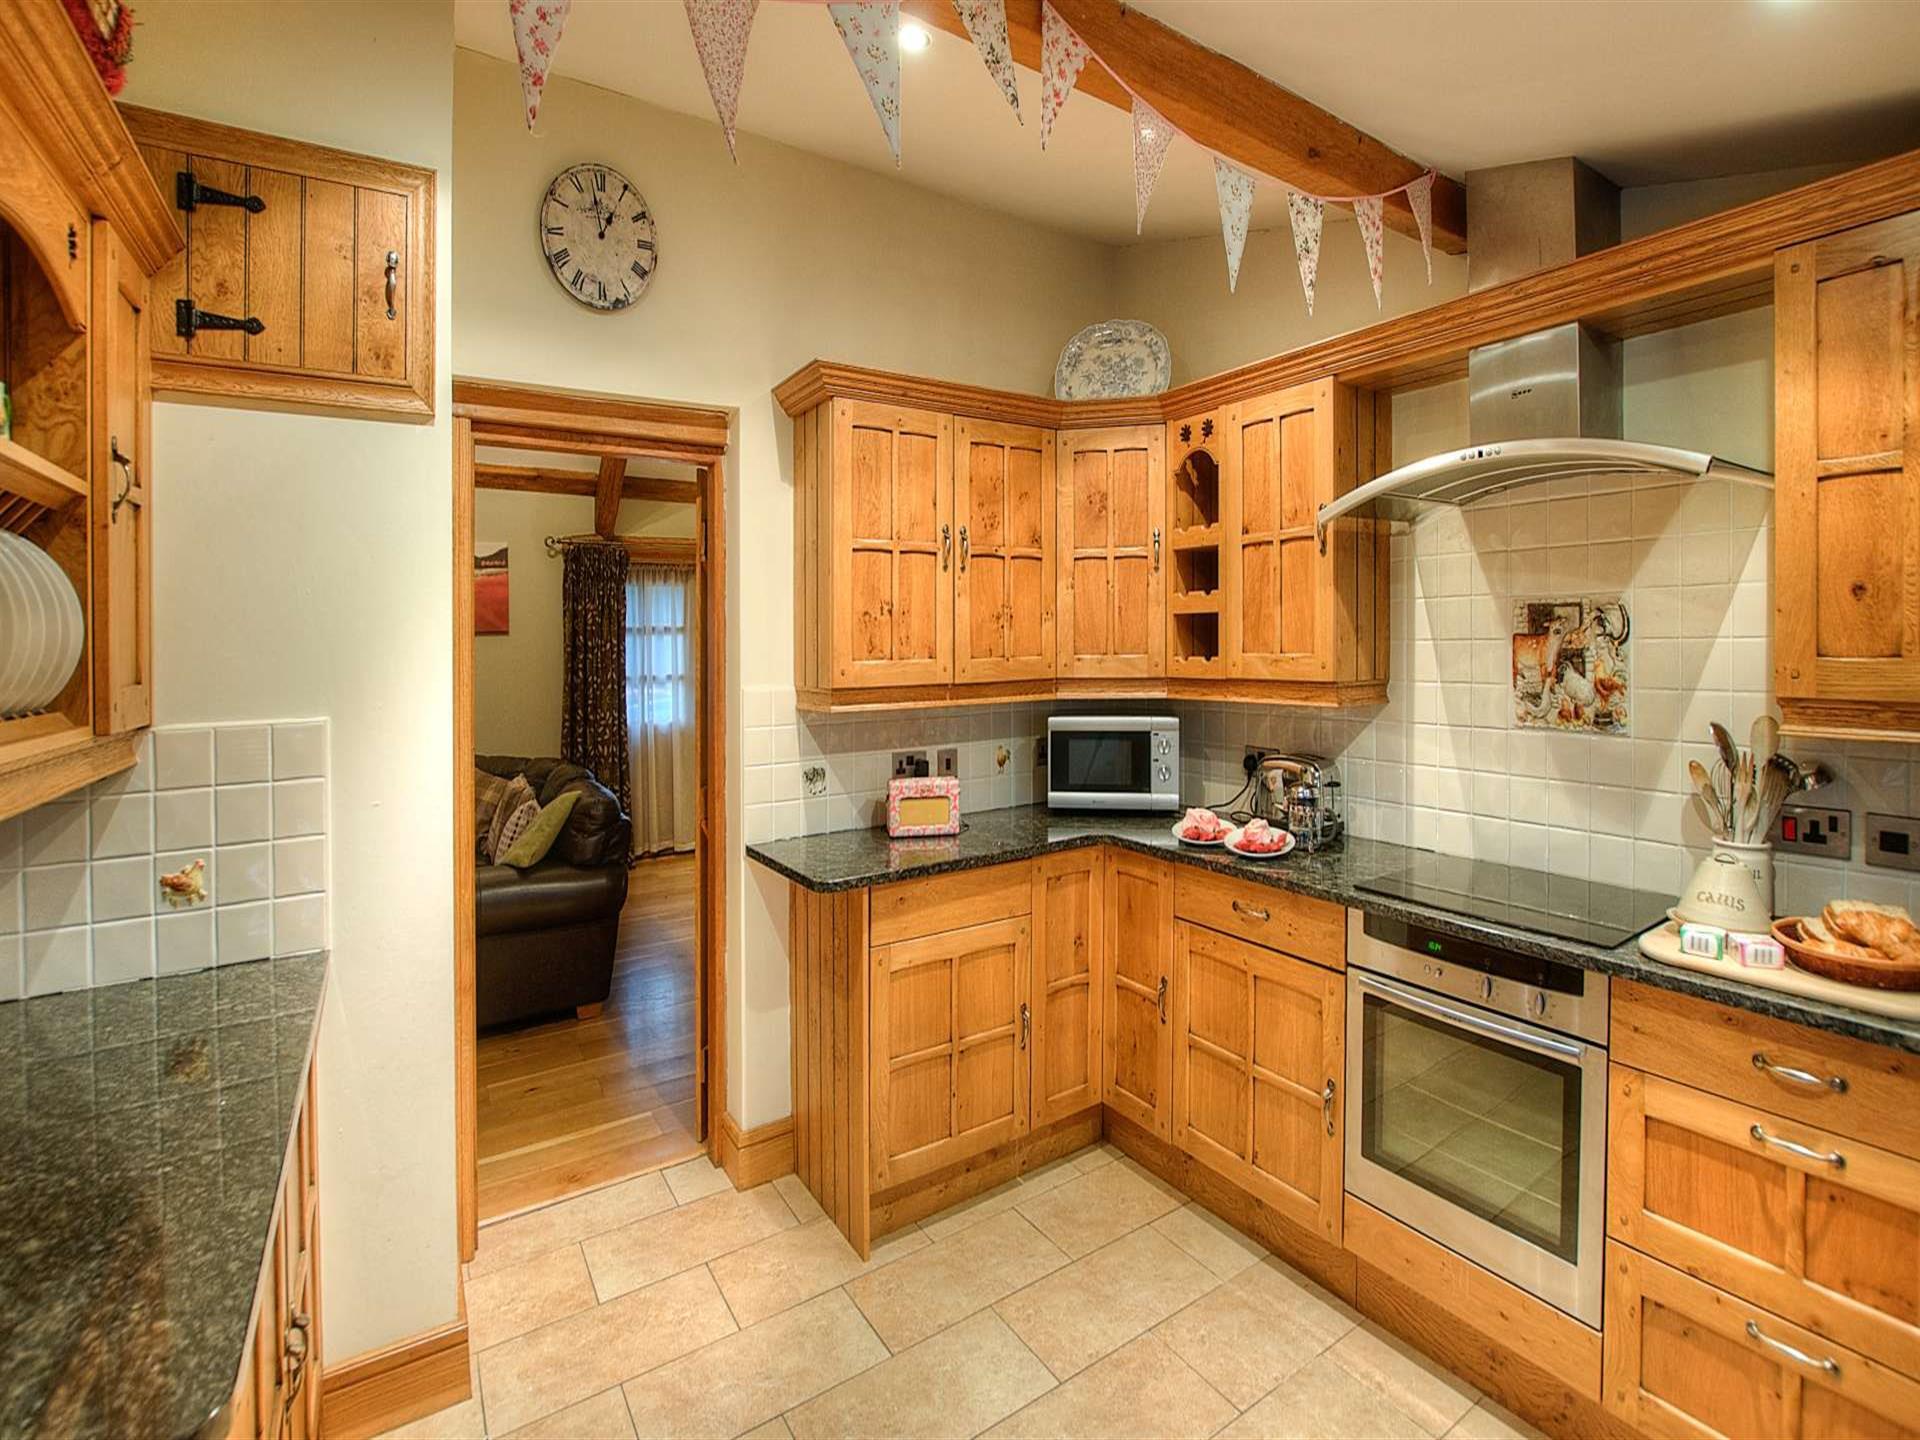 Self catering Pembrokeshire cottage - luxury fitte